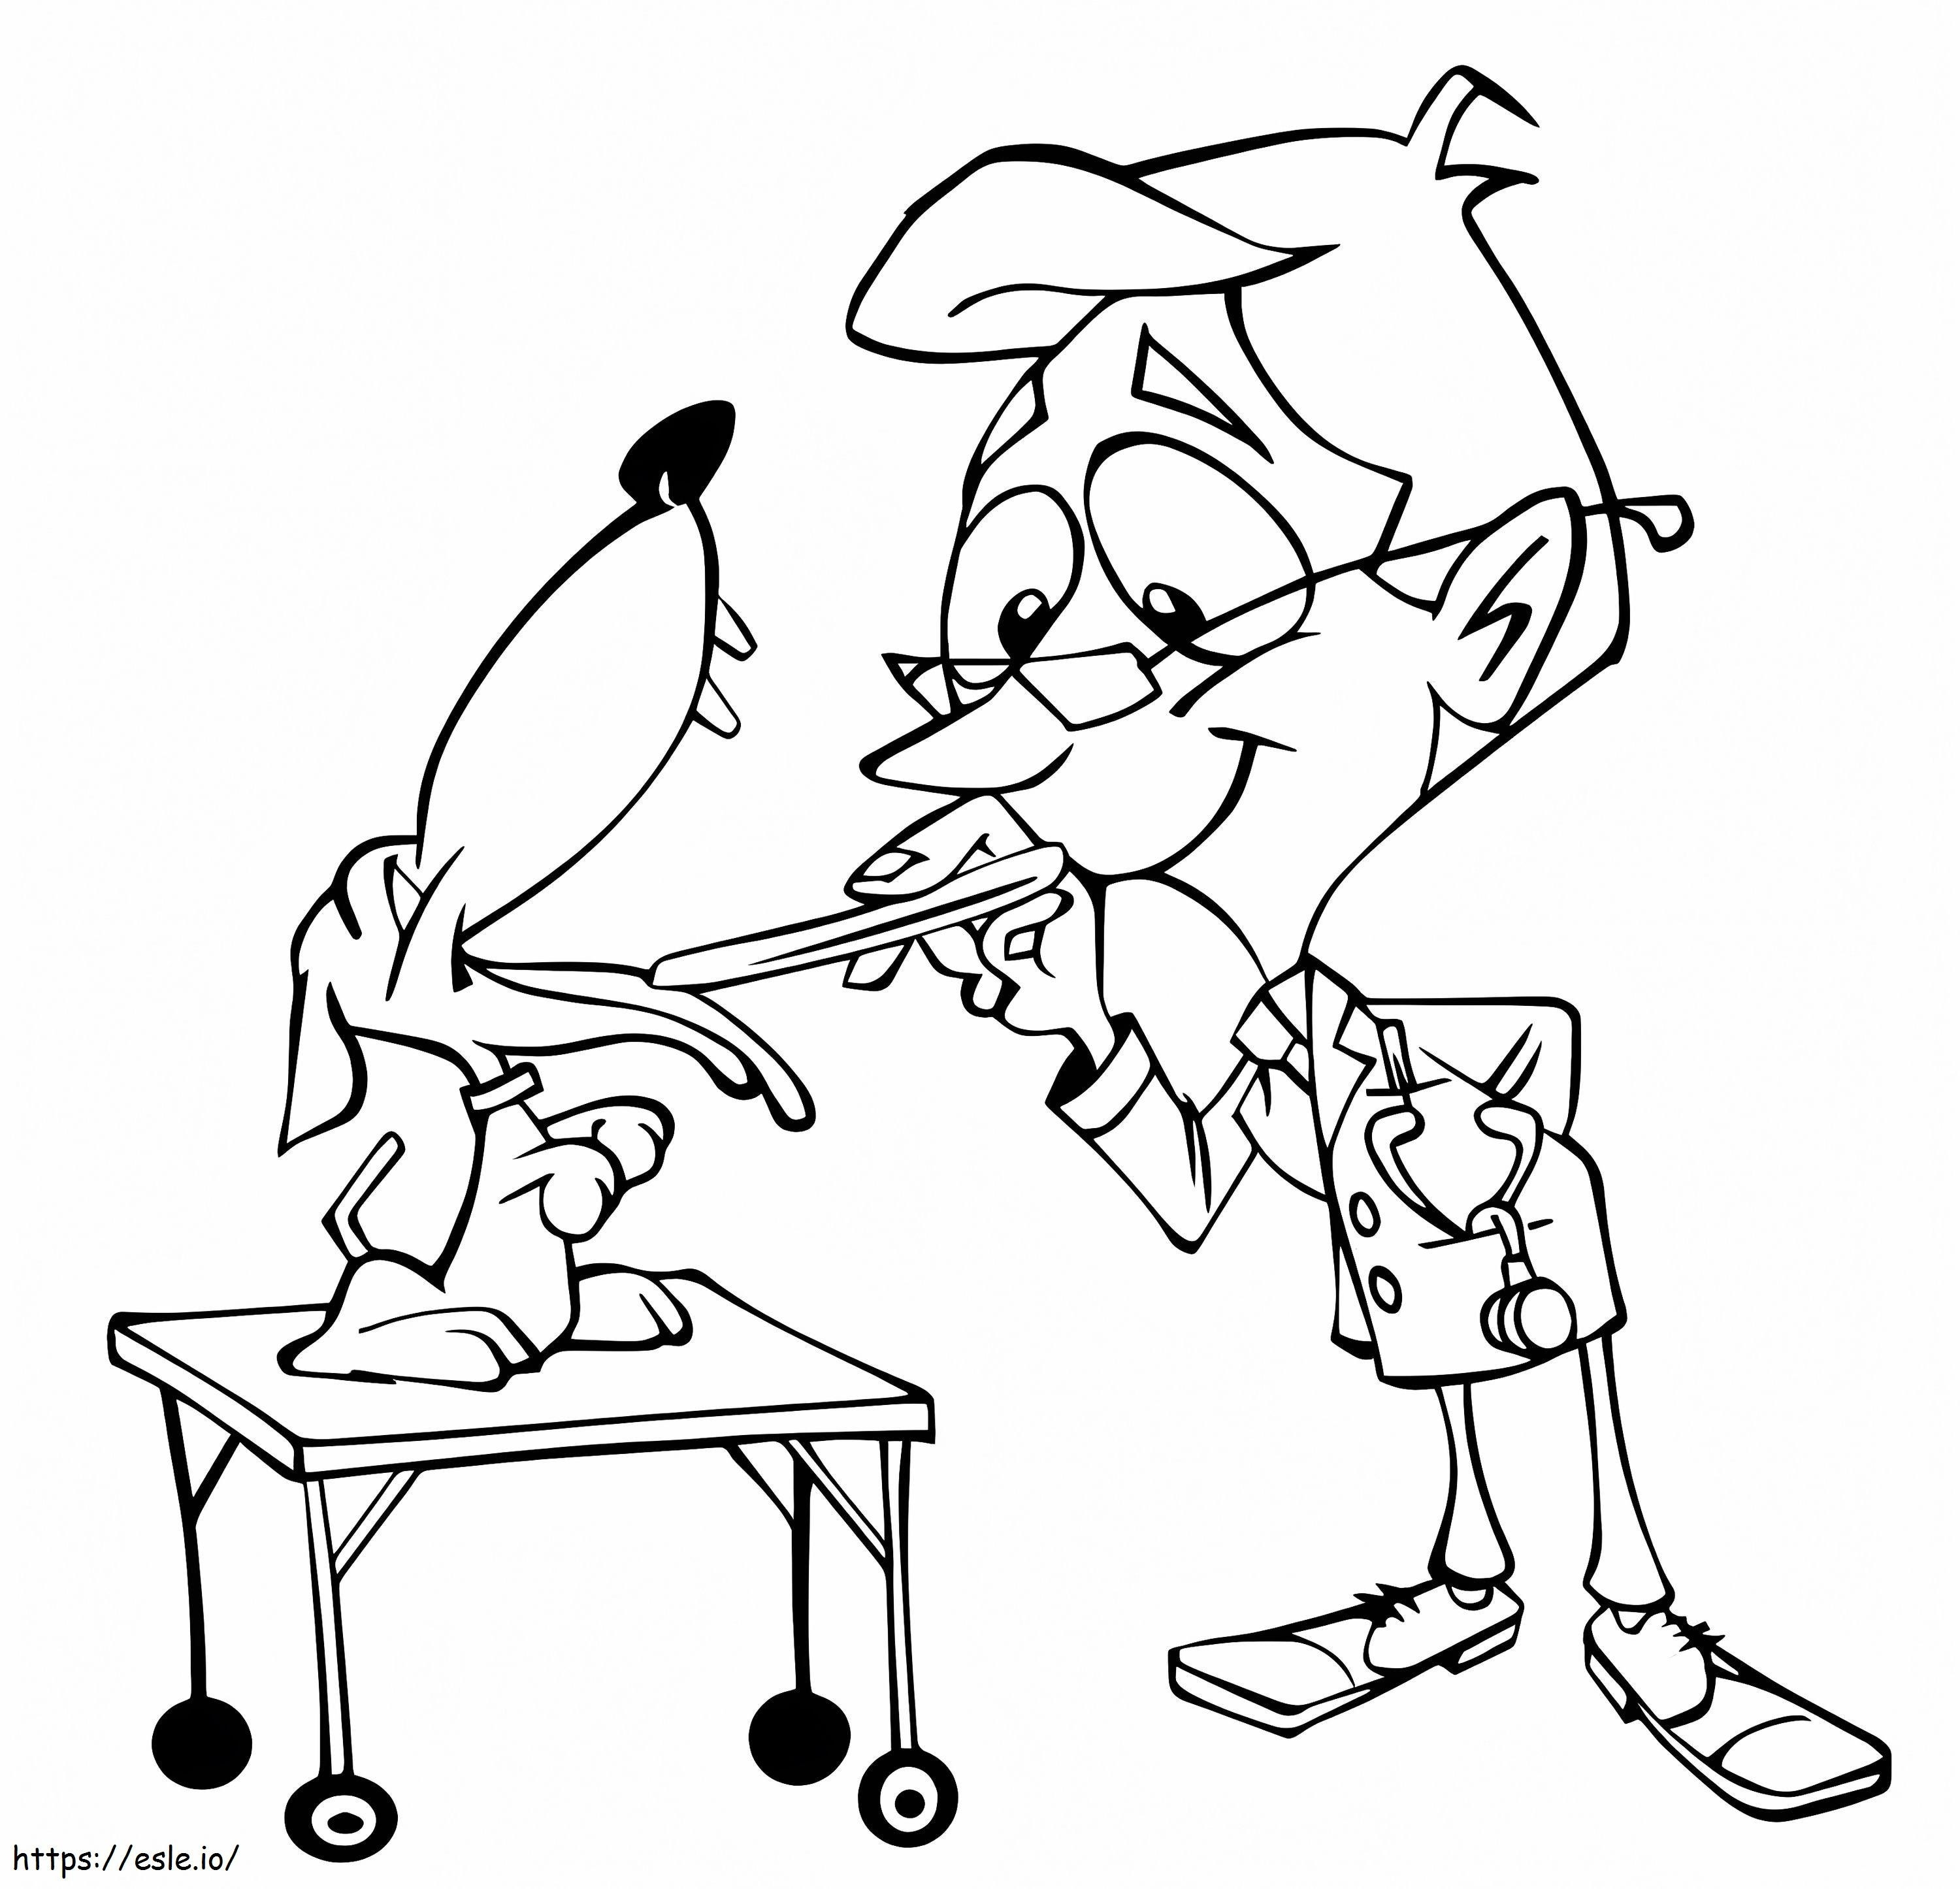 Dog And Veterinarian coloring page